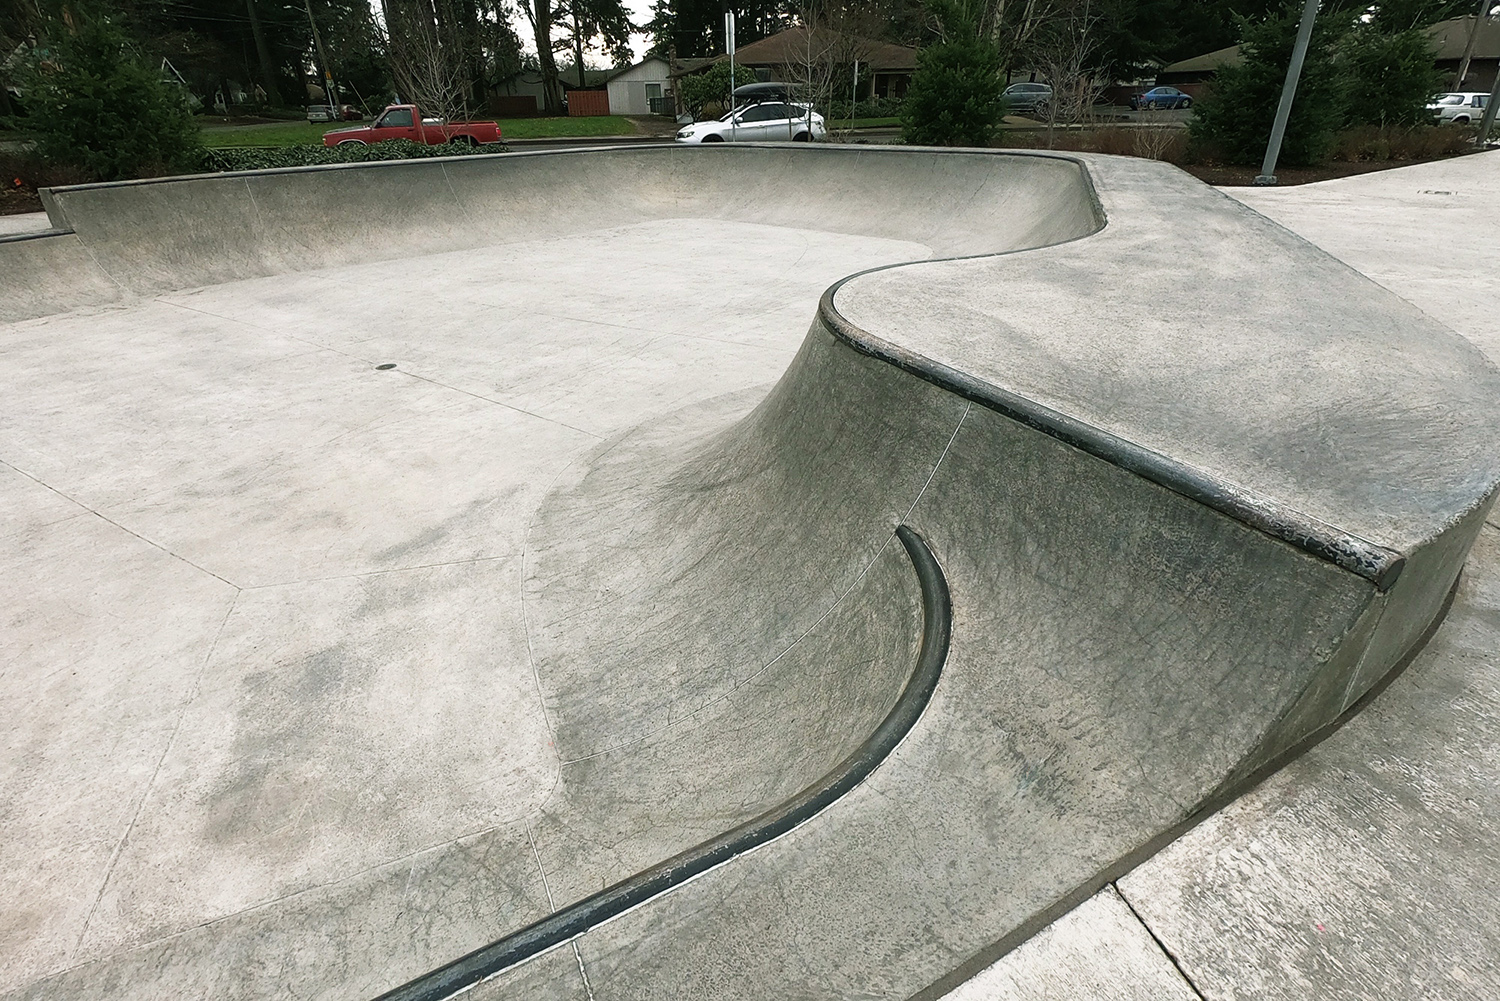  Hip section of the bowl at the Gateway Skate Spot 